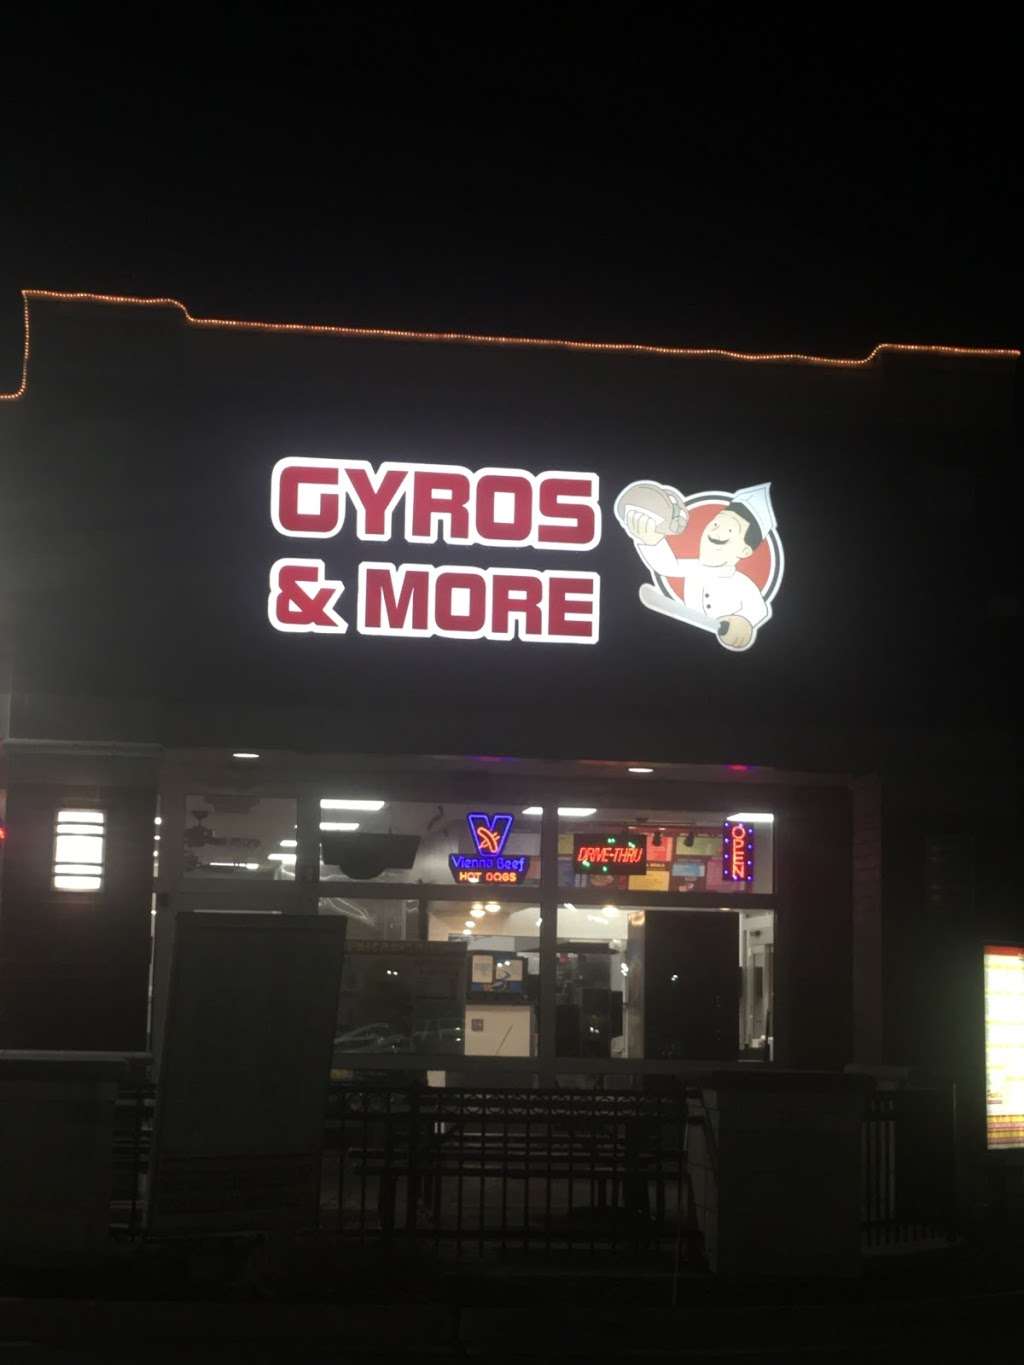 Gyros & more | Photo 3 of 7 | Address: 285 W Roosevelt Rd suite 115, West Chicago, IL 60185, USA | Phone: (630) 473-0885